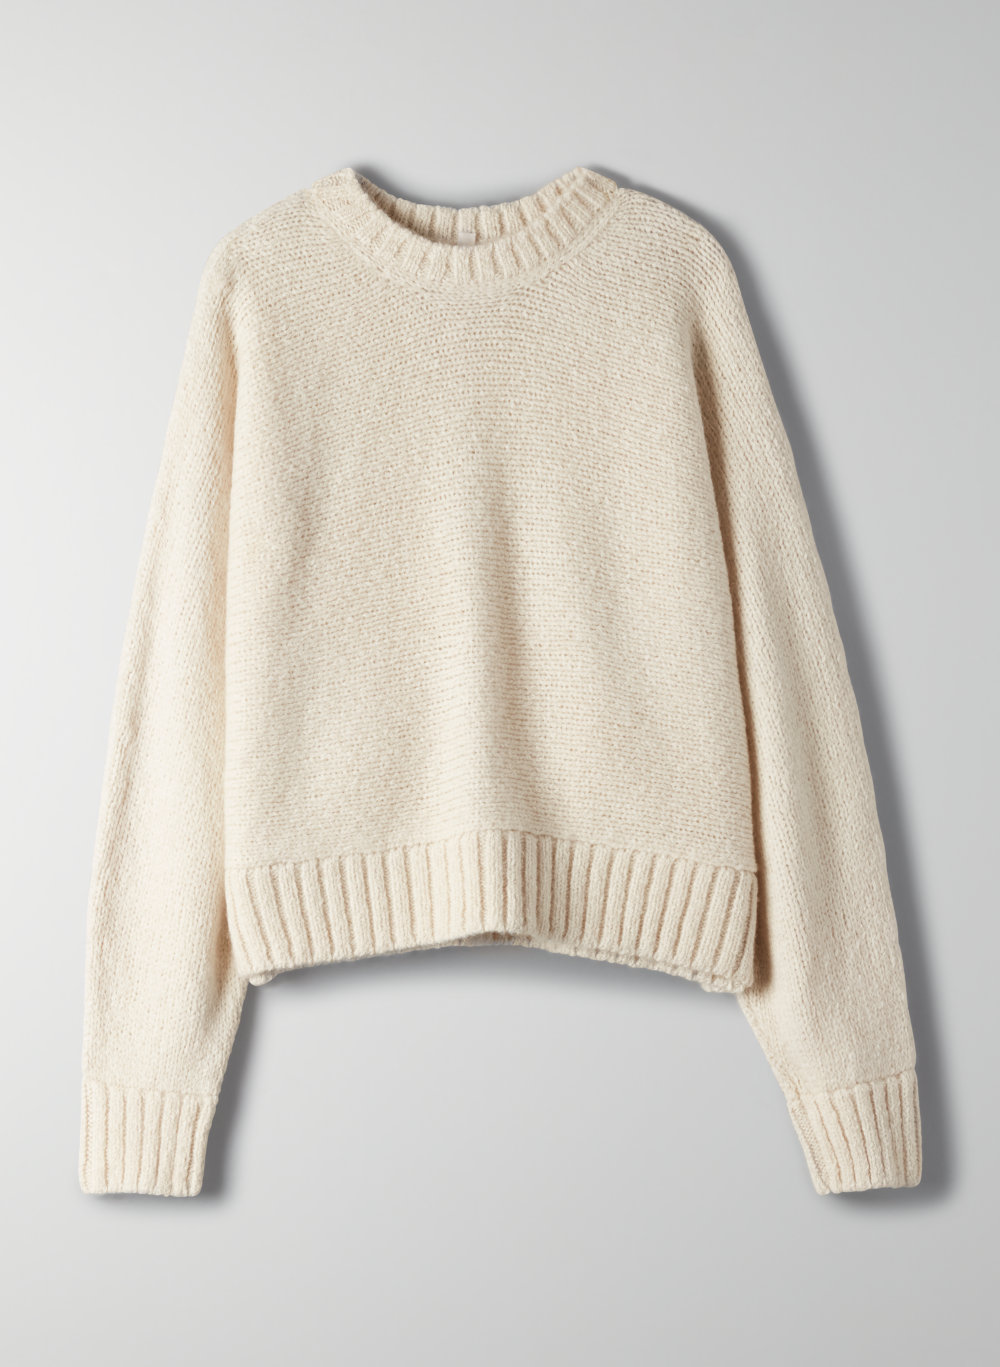 The Group by Babaton DAY OFF SWEATER | Aritzia INTL